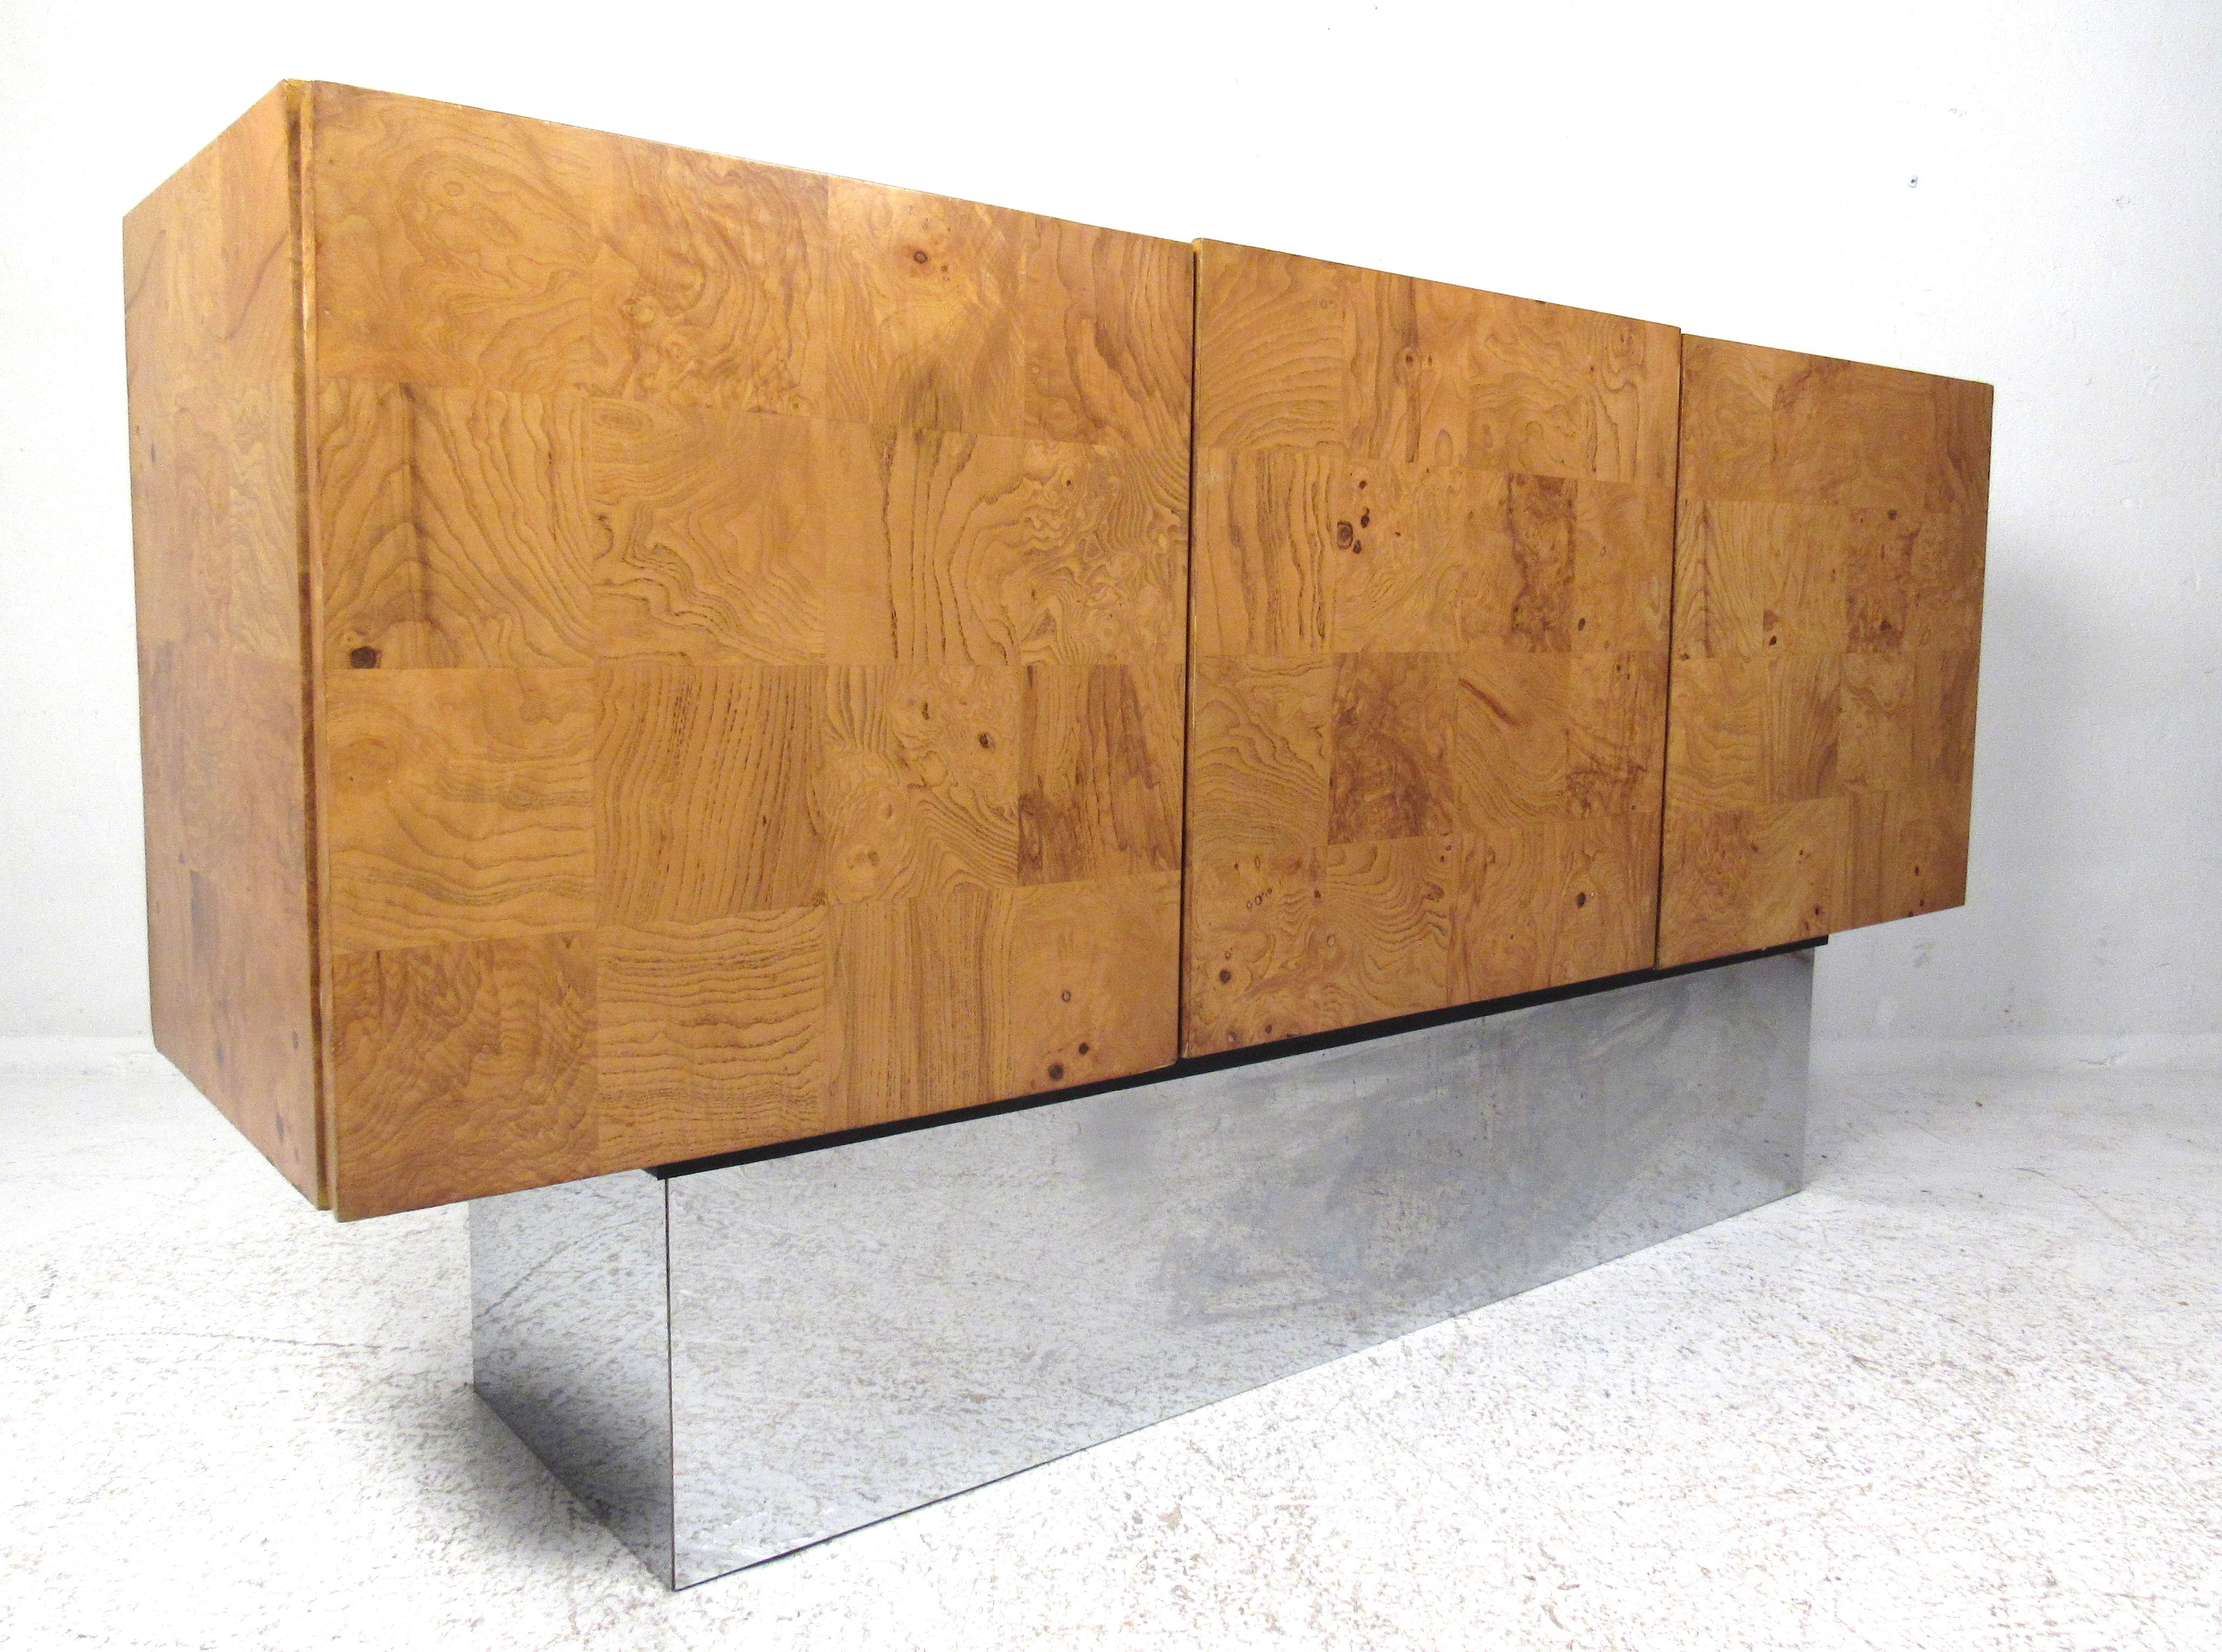 Early 1970s credenza designed by Milo Baughman for Thayer Coggin incorporates beautiful patchwork burl wood on a plinth-style tall chrome base. The interior has two storage compartments. Please confirm item location (NY or NJ) with dealer.